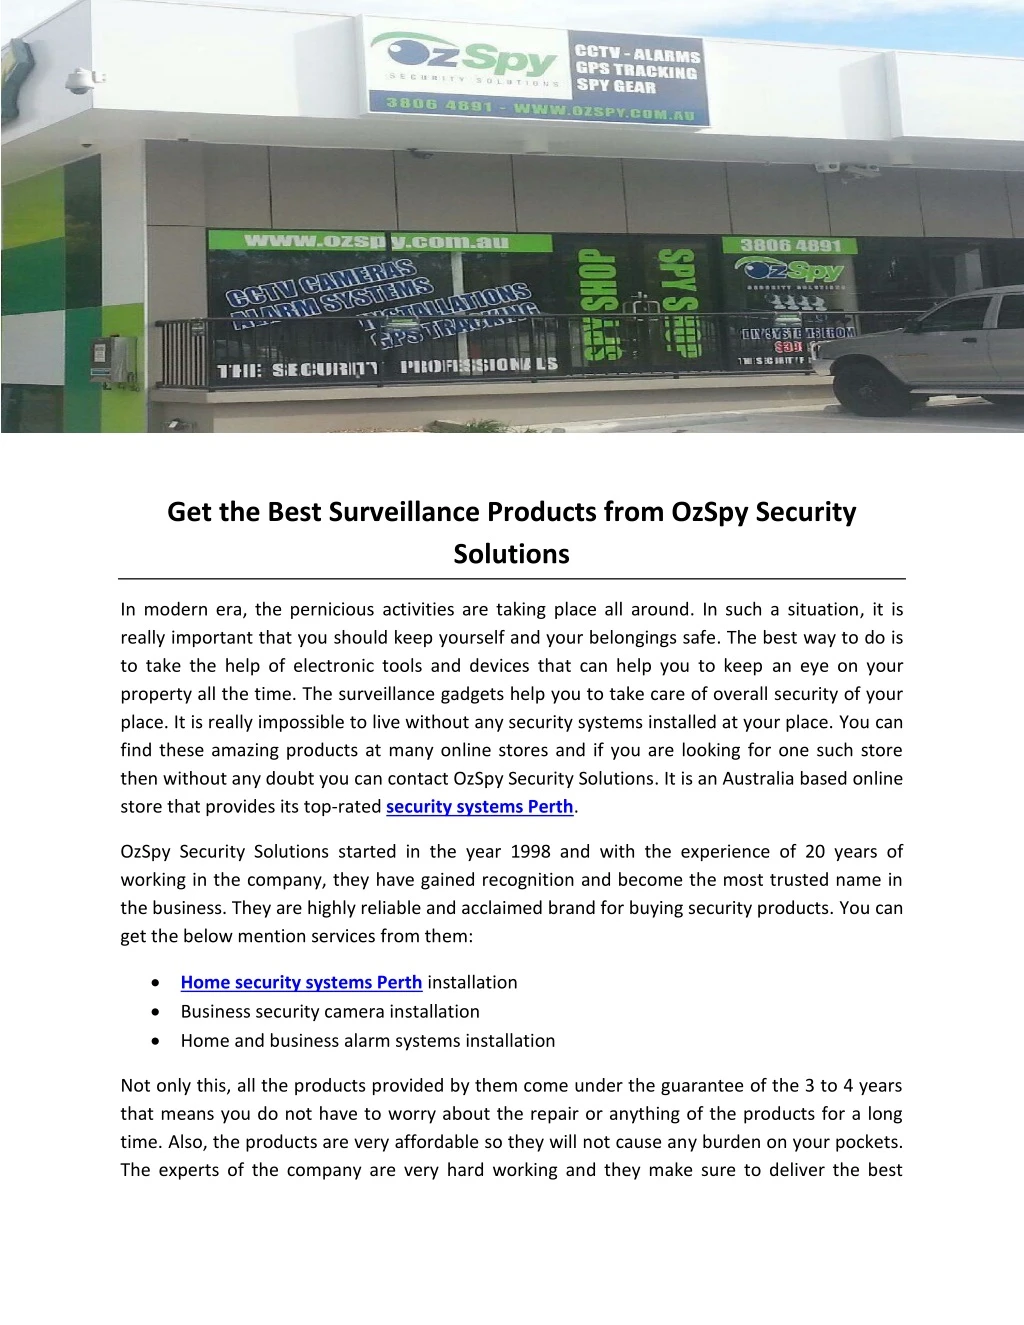 get the best surveillance products from ozspy